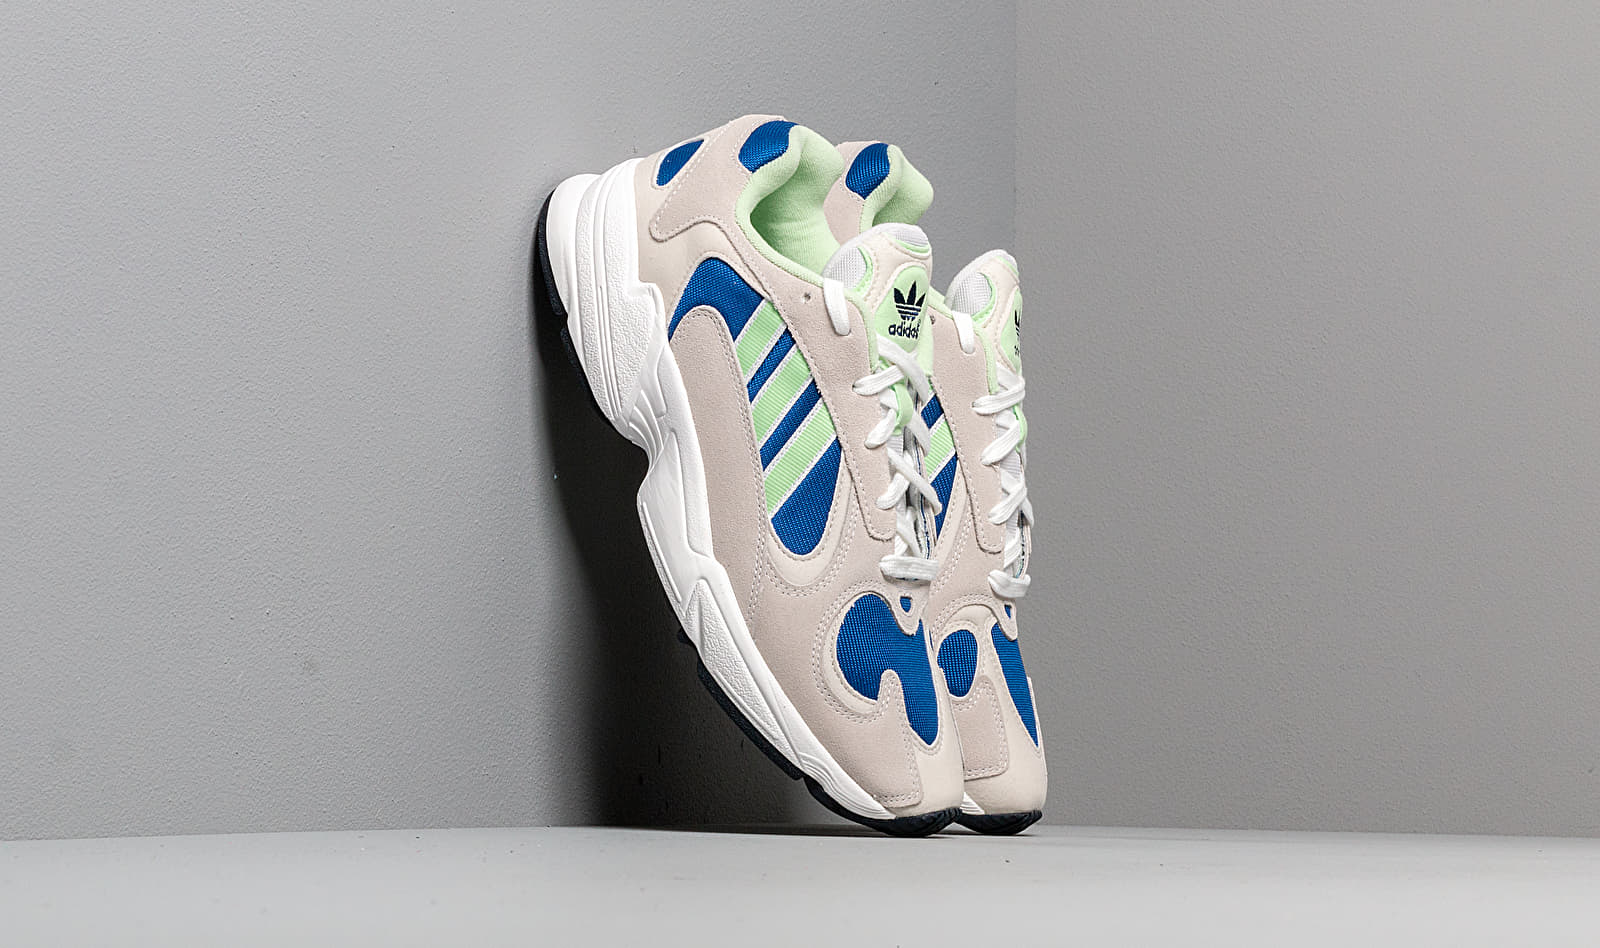 adidas Yung-1 Ftw White/ Glow Green/ Core Royal EE5318